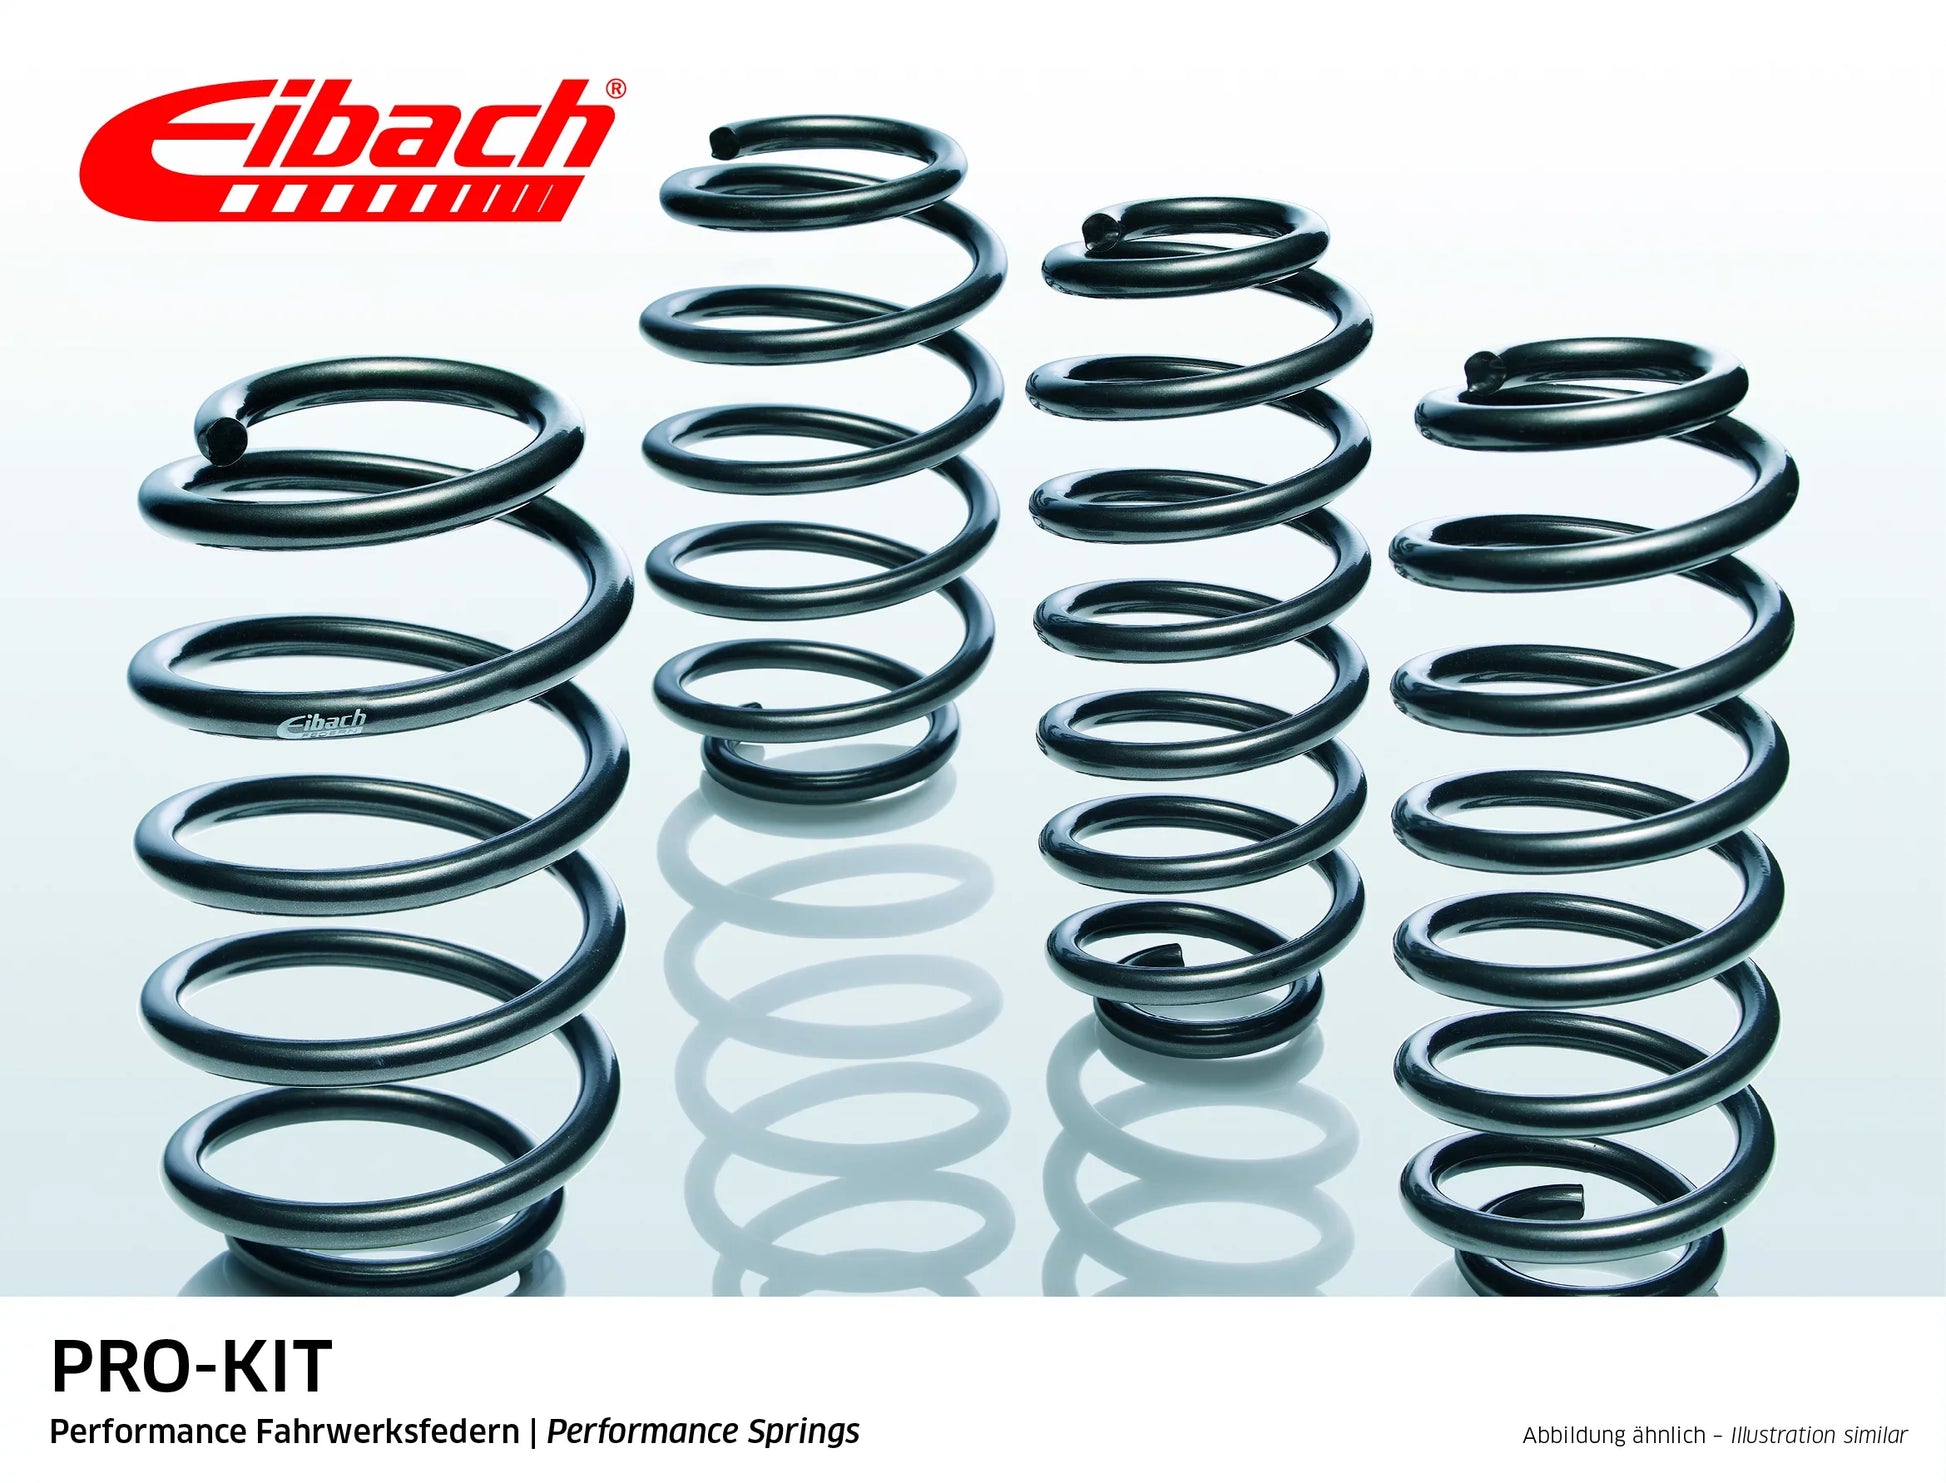 Eibach Pro-Kit Lowering Springs (E10-11-001-01-22) at £329.00